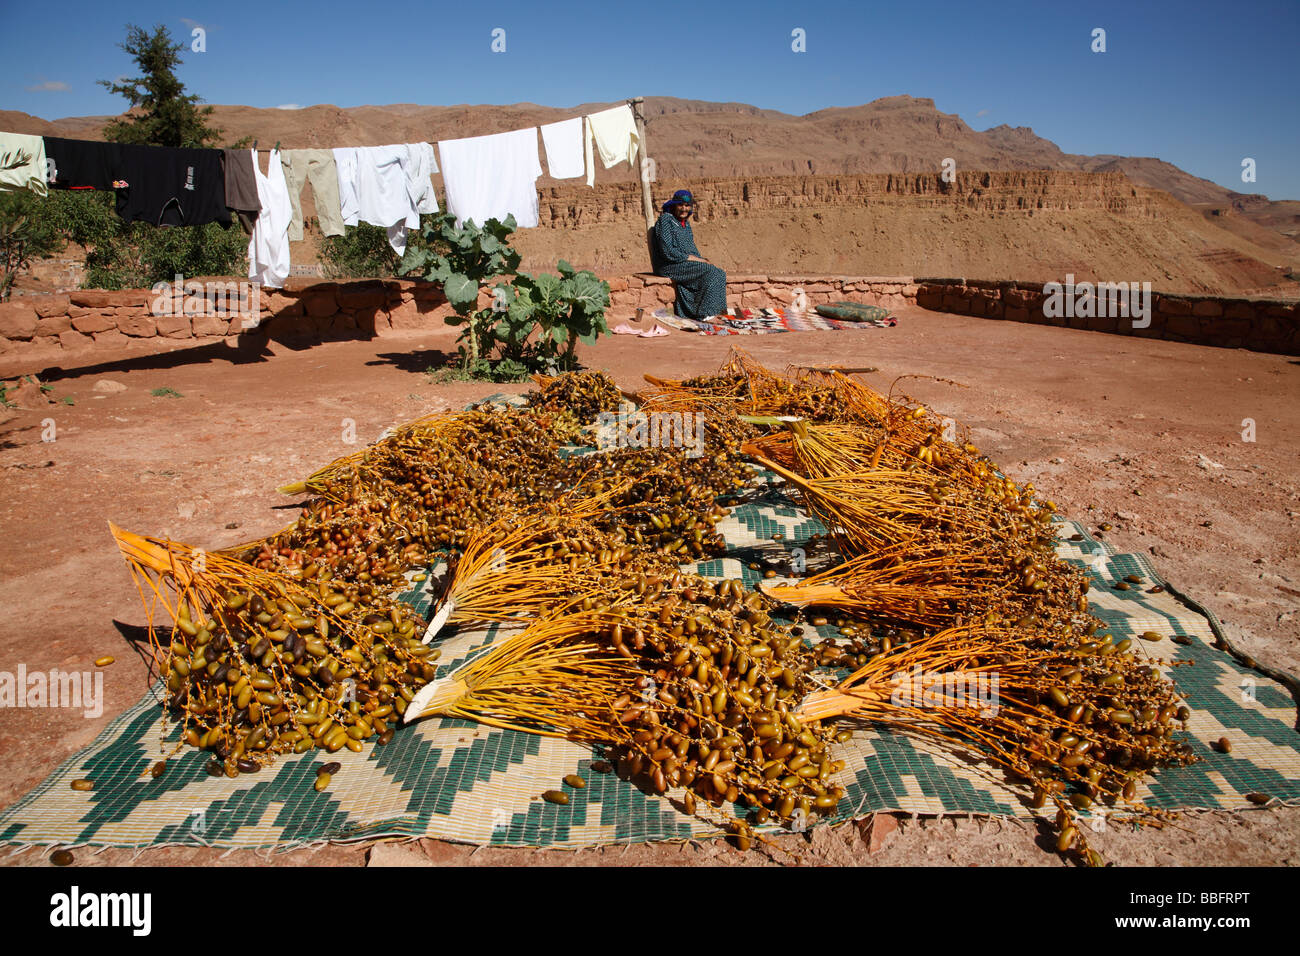 Africa, North Africa, Morocco, Tinerhir, Atlas Mountains, Dates Drying in Backyard, Old Woman Stock Photo